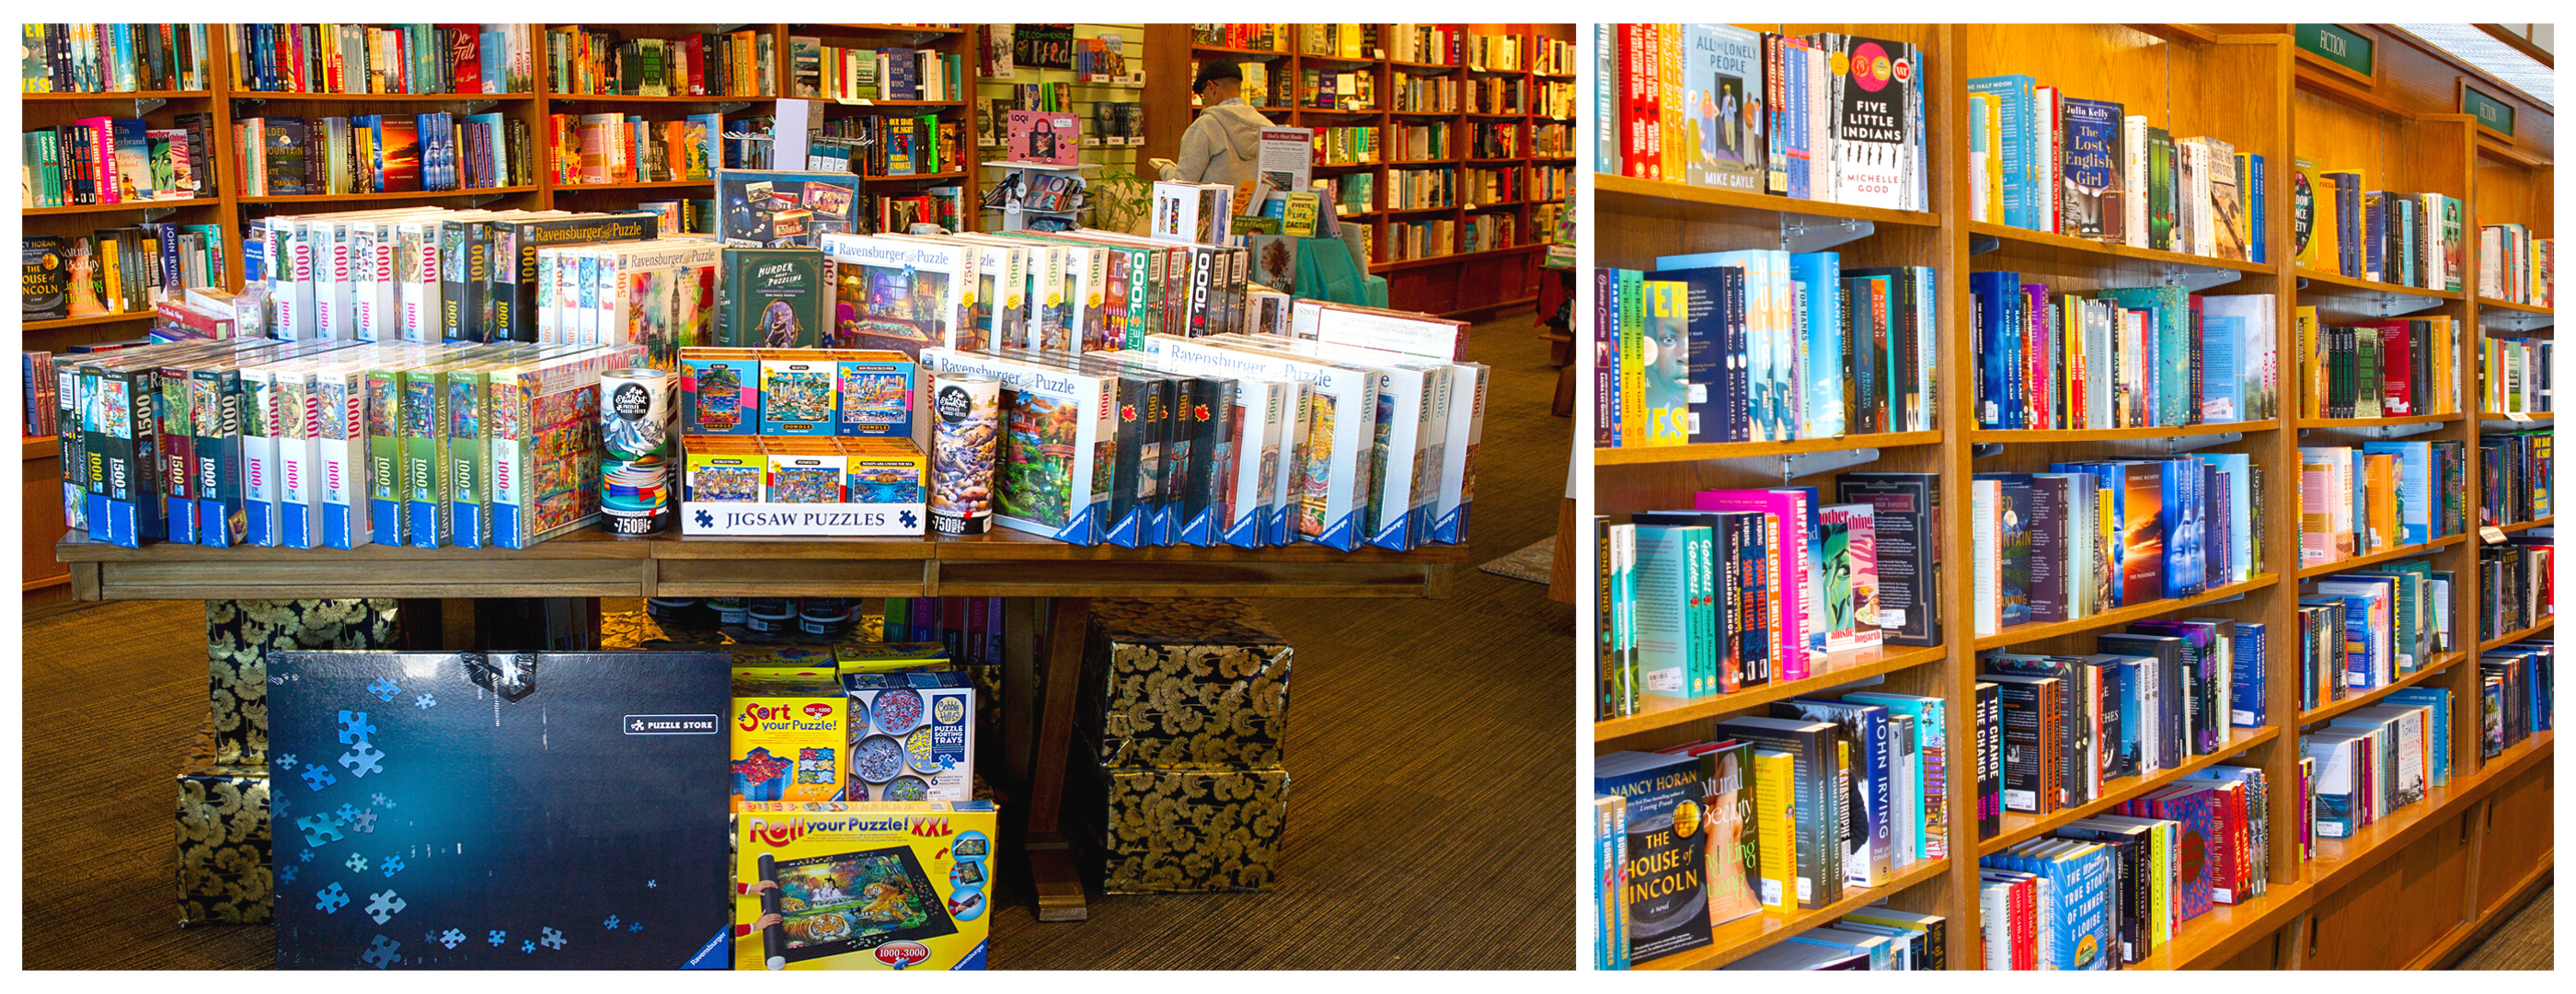 Photos of the interior of Owl's Nest Books including the puzzle display and the fiction section